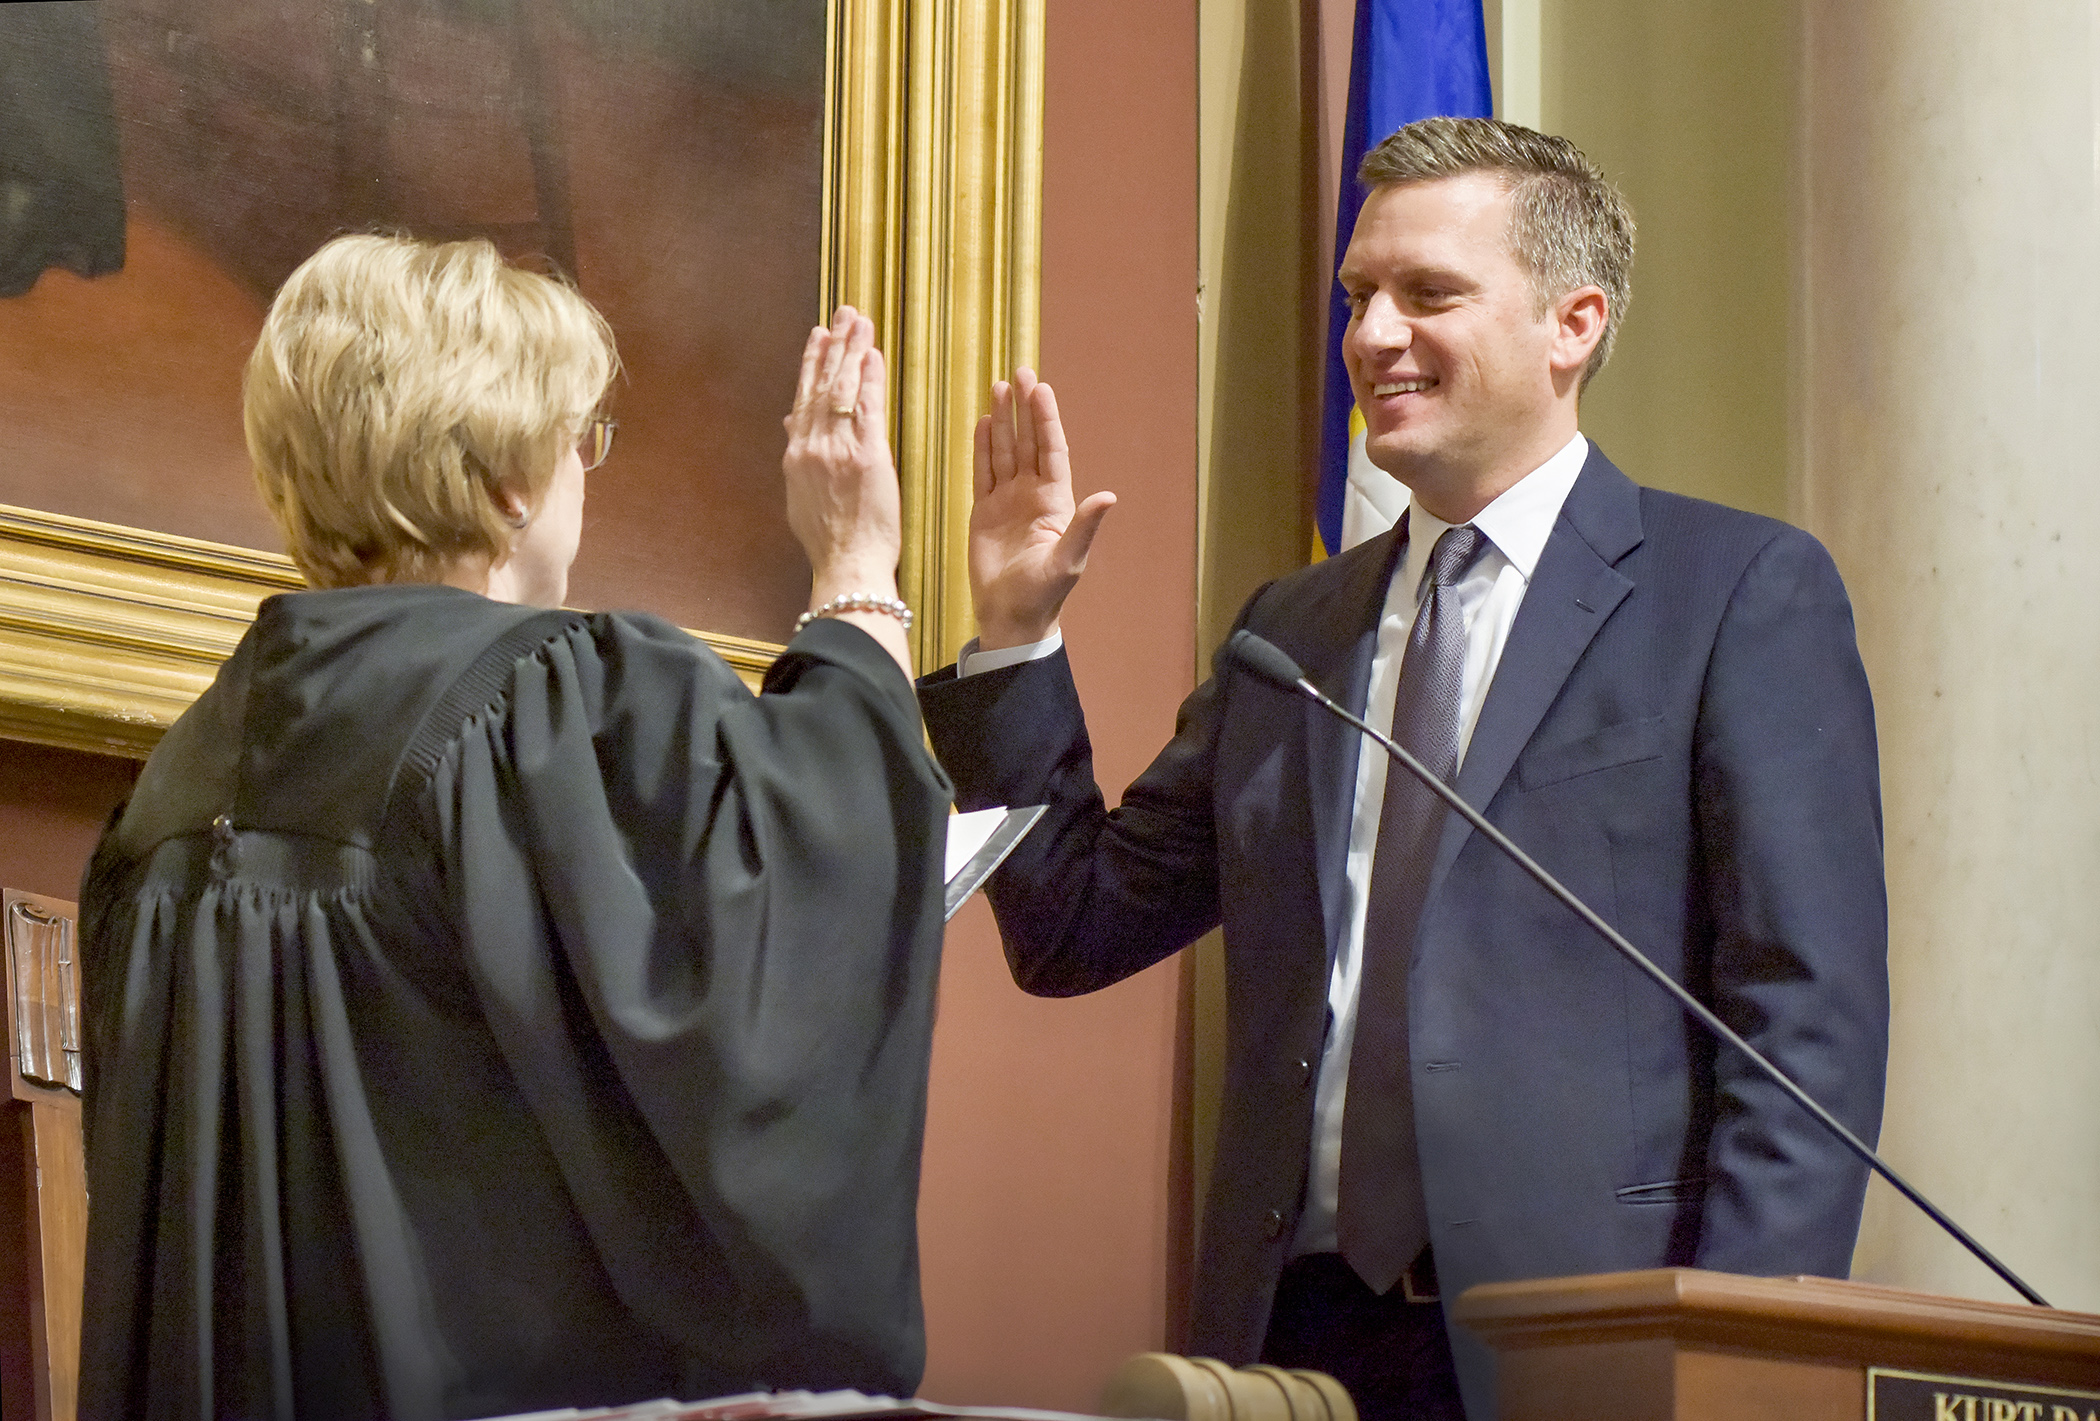 State Supreme Court Chief Justice Lorie Skjerven Gildea swears in House Speaker Kurt Daudt Jan. 3 during opening day of the 2017 legislative session. Photo by Andrew VonBank